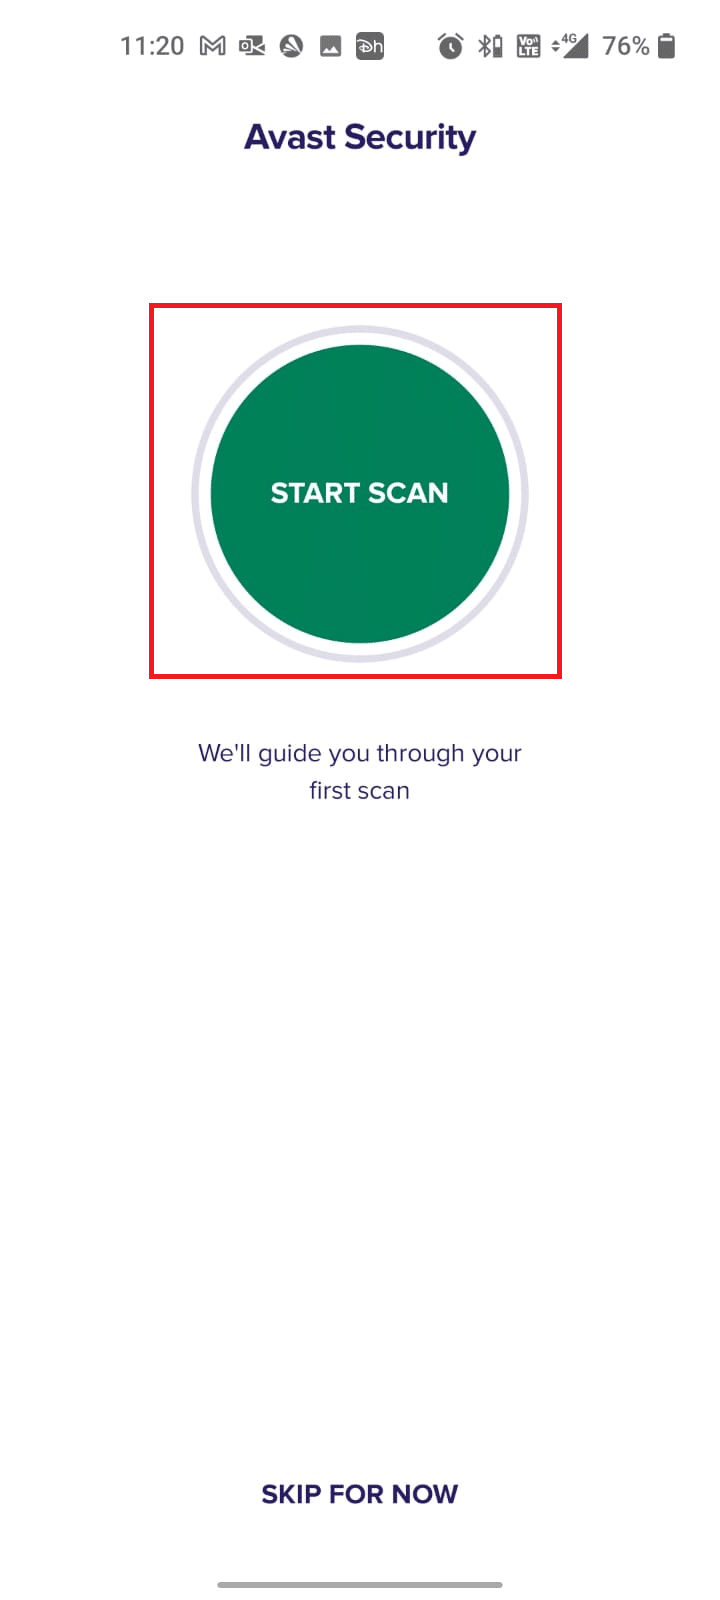 tap START SCAN. Fix WhatsApp Keeps Crashing on Android